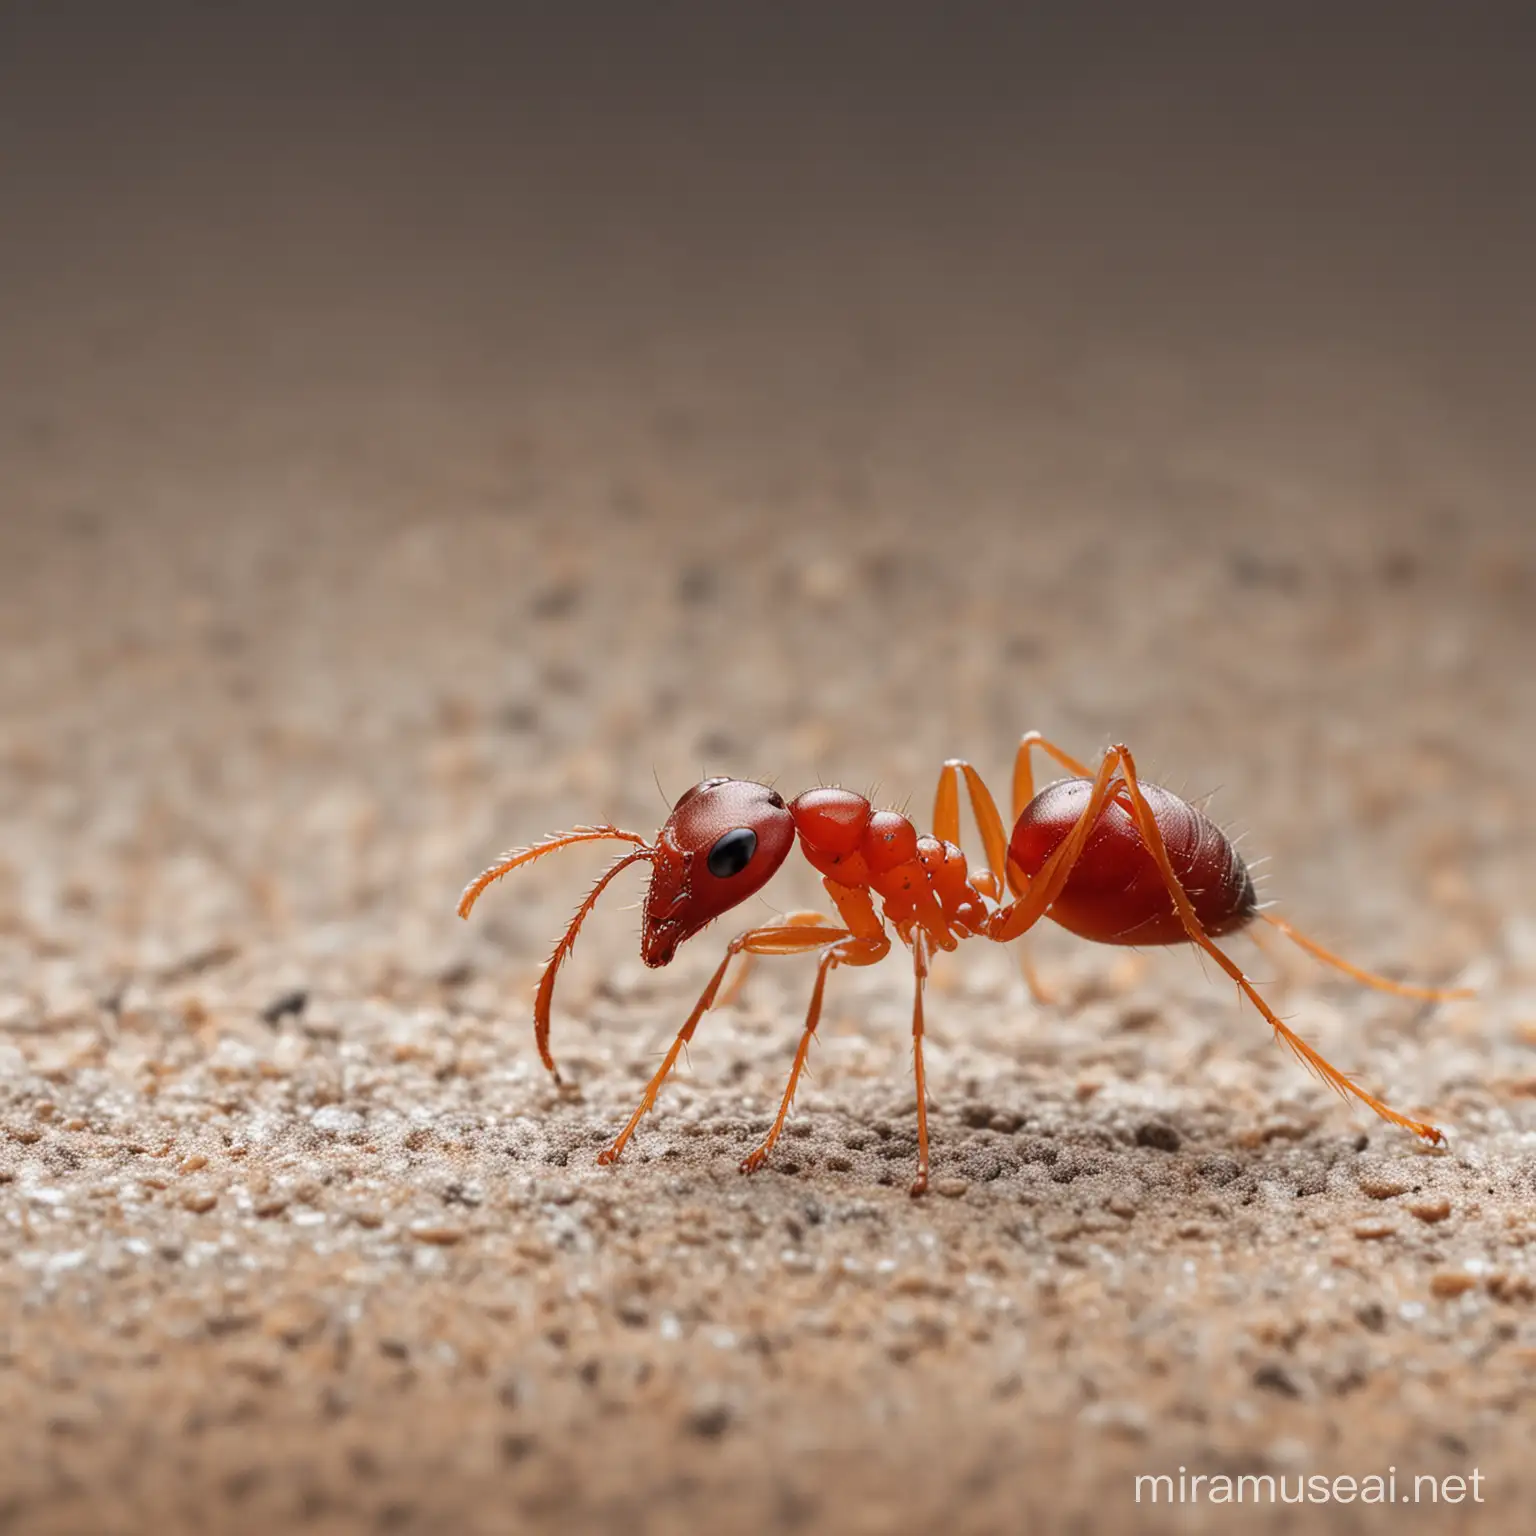 A red ant at 30mm lens macro